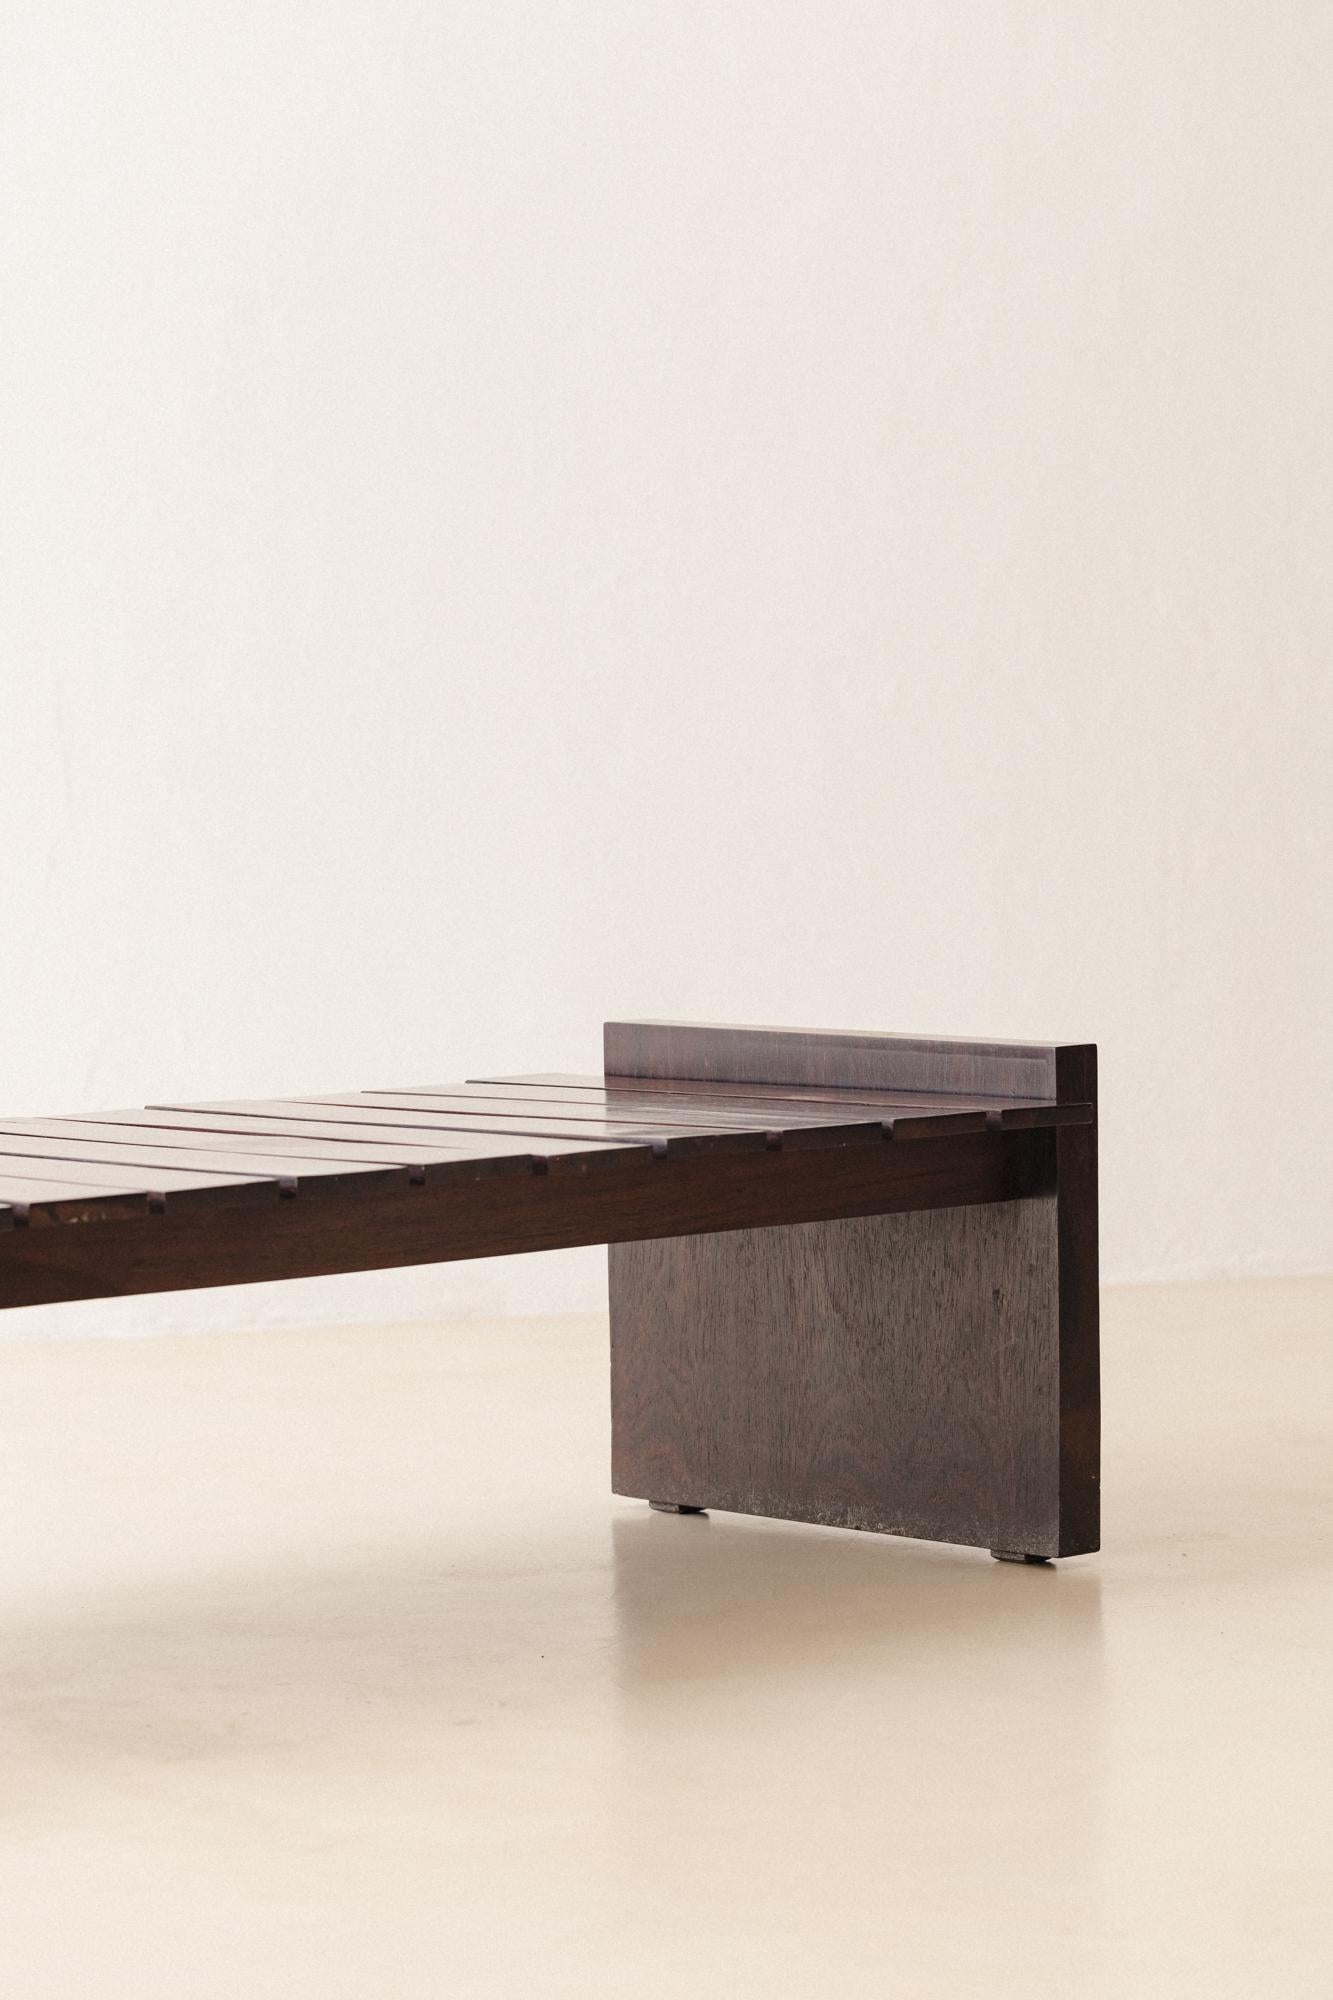 This gorgeous bench was produced in the 1960s by Celina Decorações, which signed one of the most modern lines of Brazilian furniture at the period. 

It consists of a very well-constructed piece in solid Rosewood, with slats rhythmically